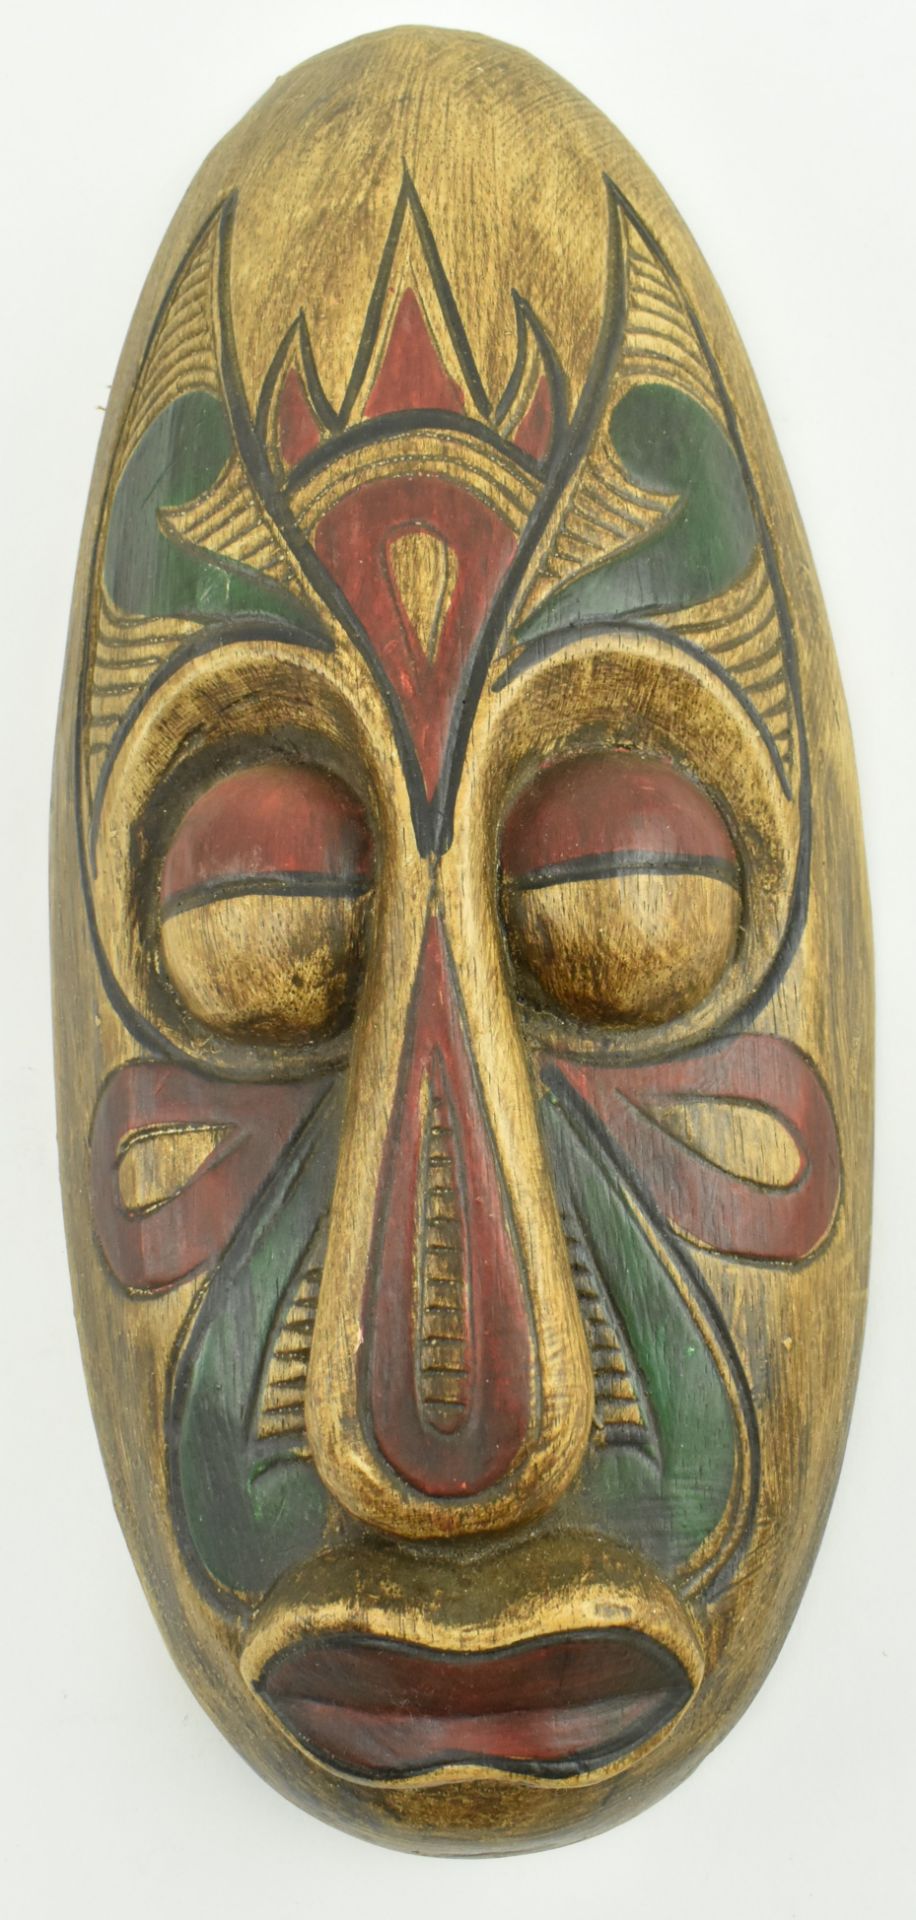 THREE RUSTIC AFRICAN TRIBAL WOODEN WALL MASKS - Image 4 of 5